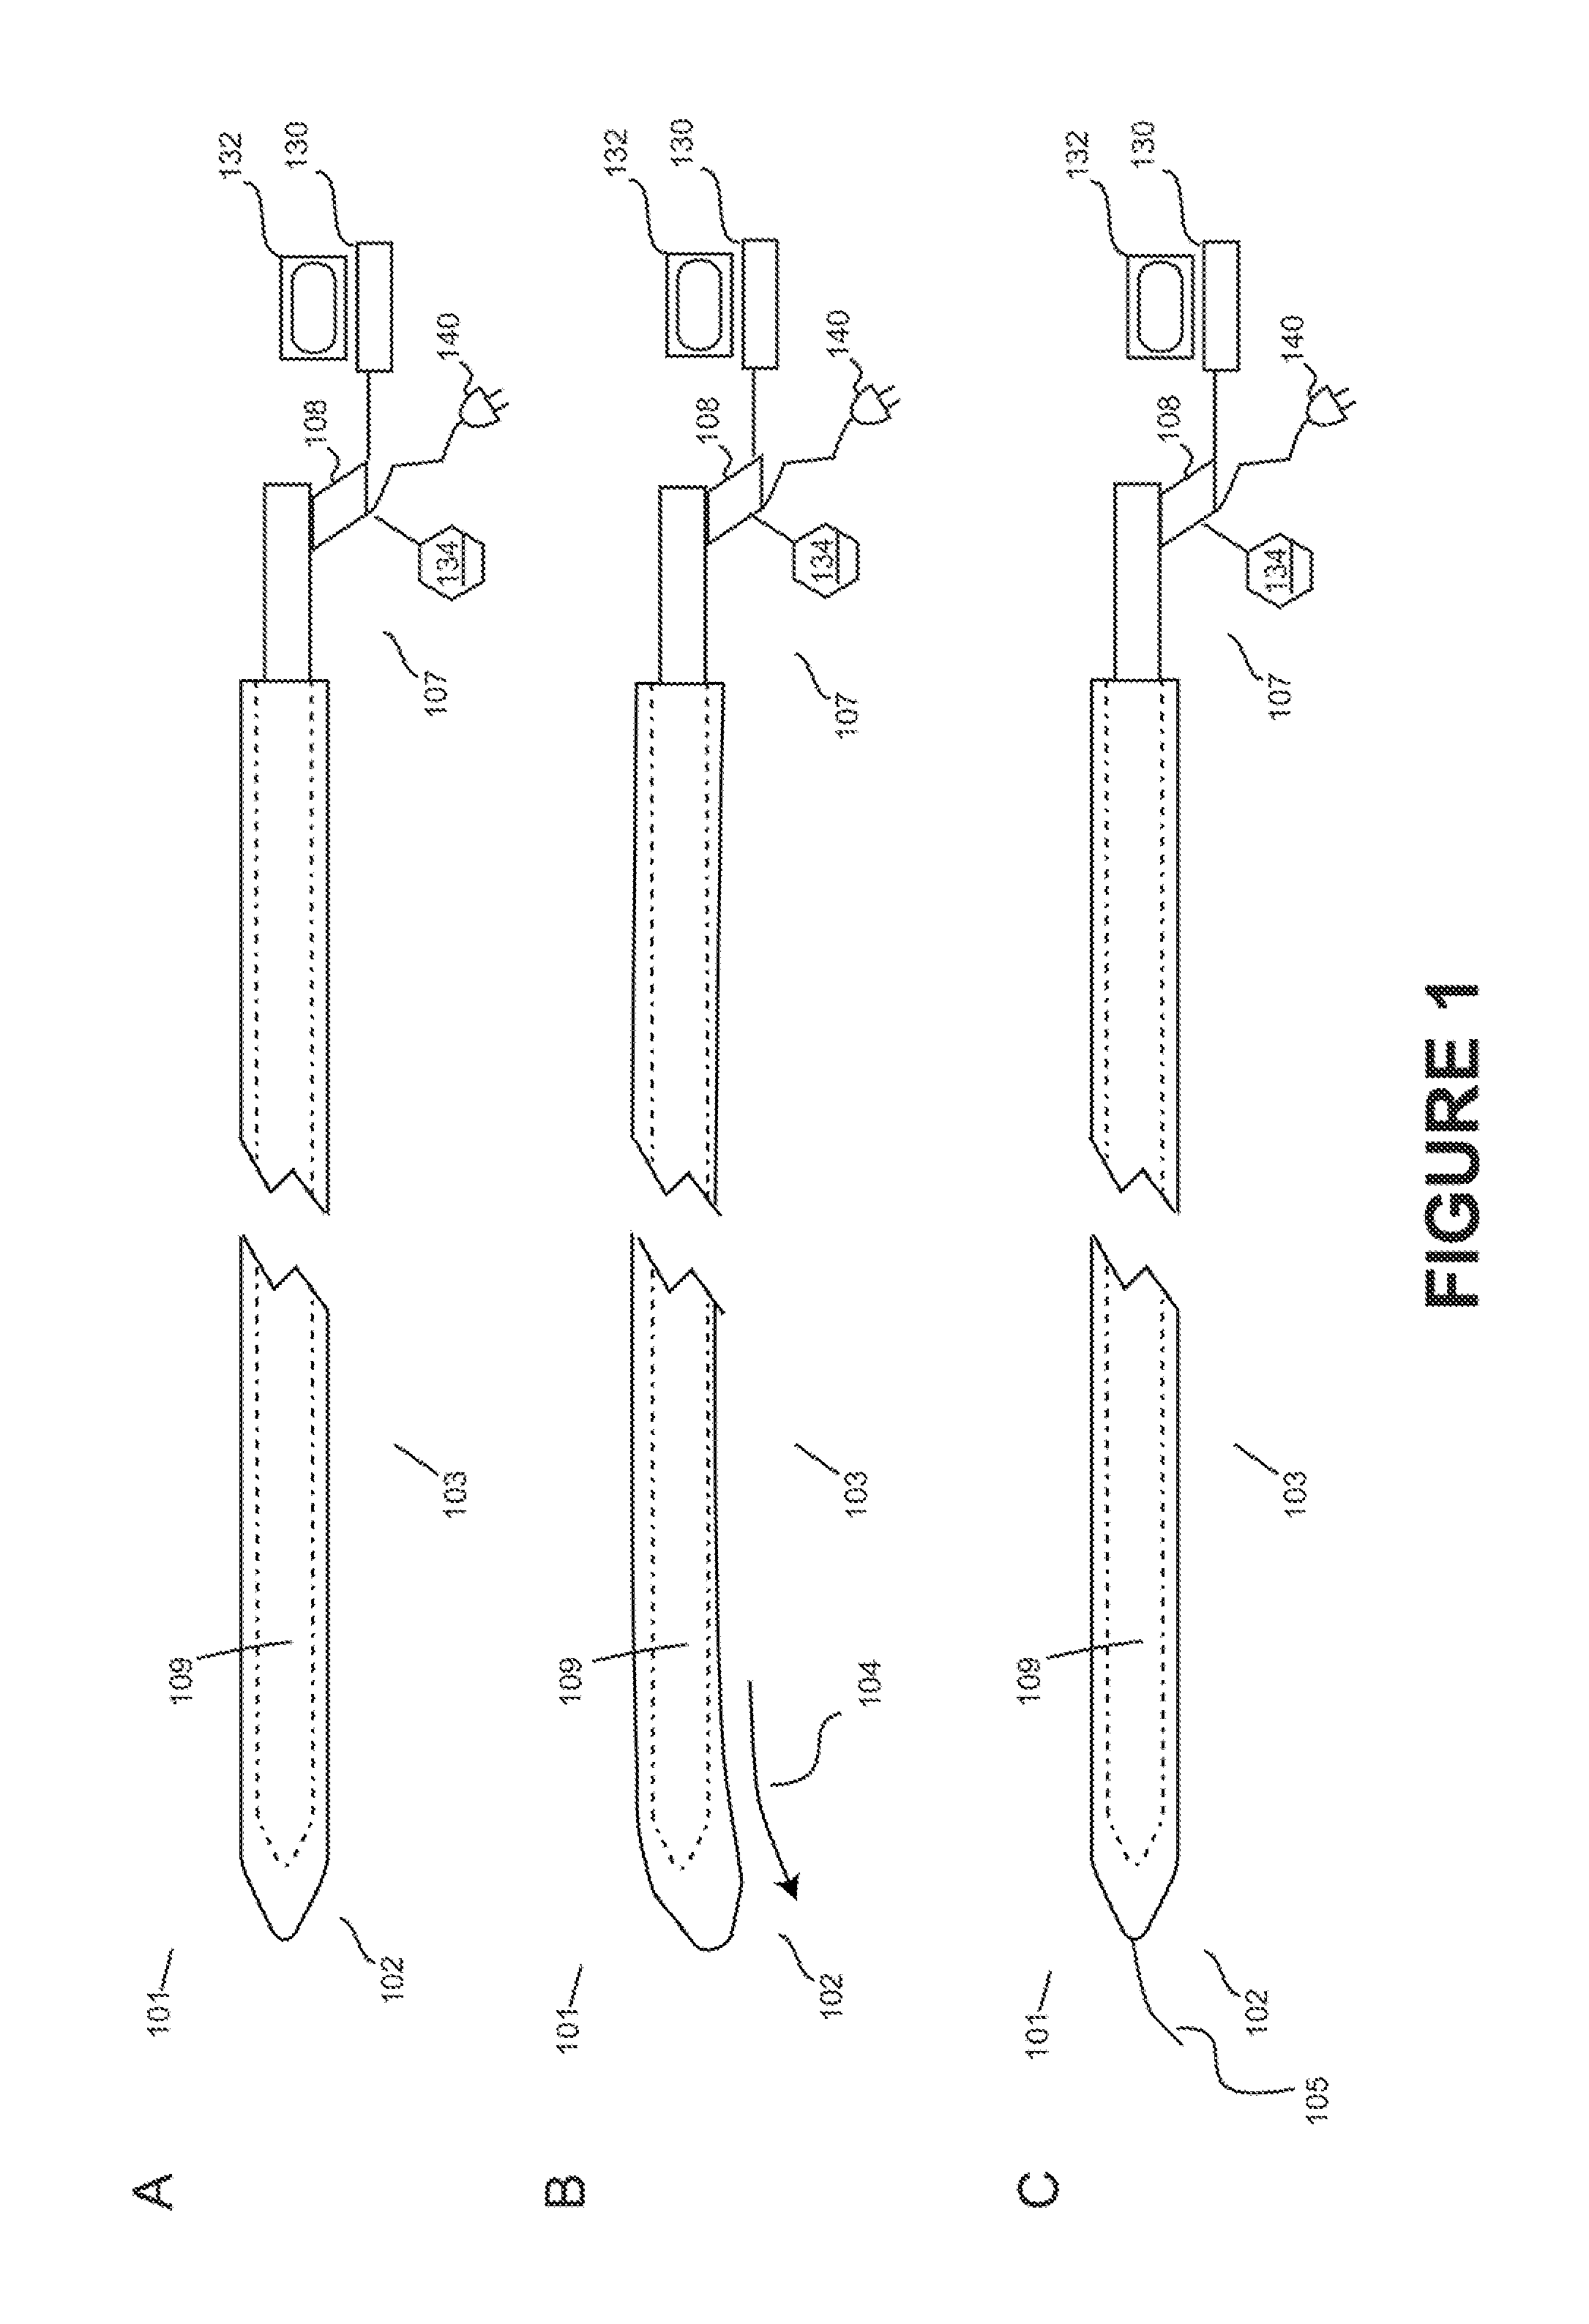 Device for reducing renal sympathetic nerve activity